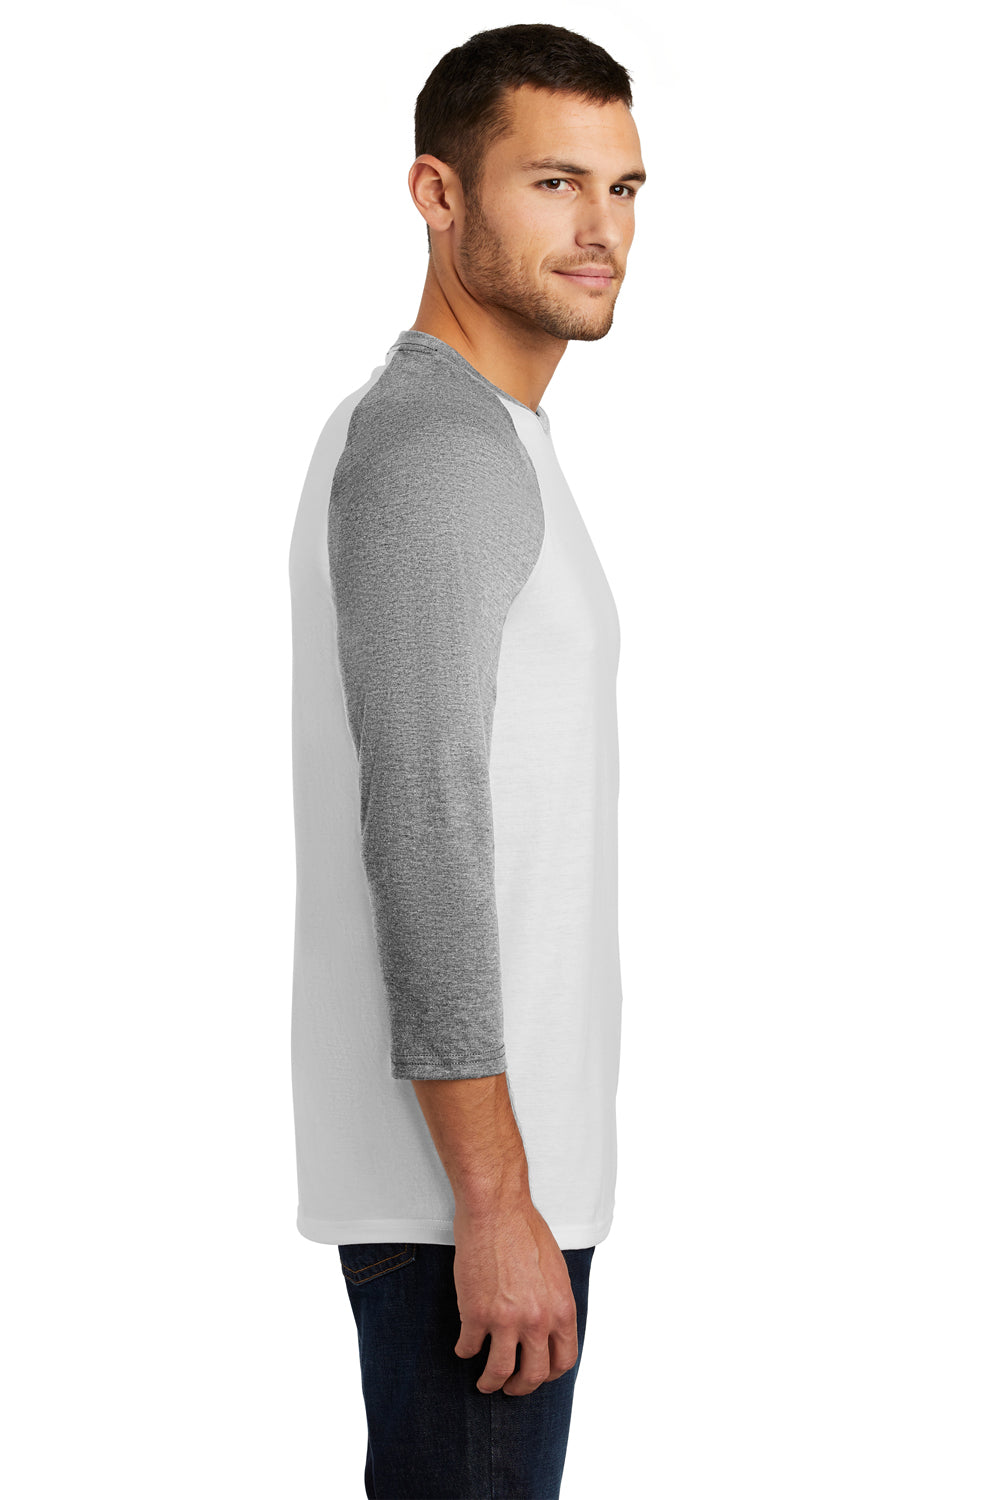 District DM136 Mens Perfect Tri 3/4 Sleeve Crewneck T-Shirt White/Grey Frost Side